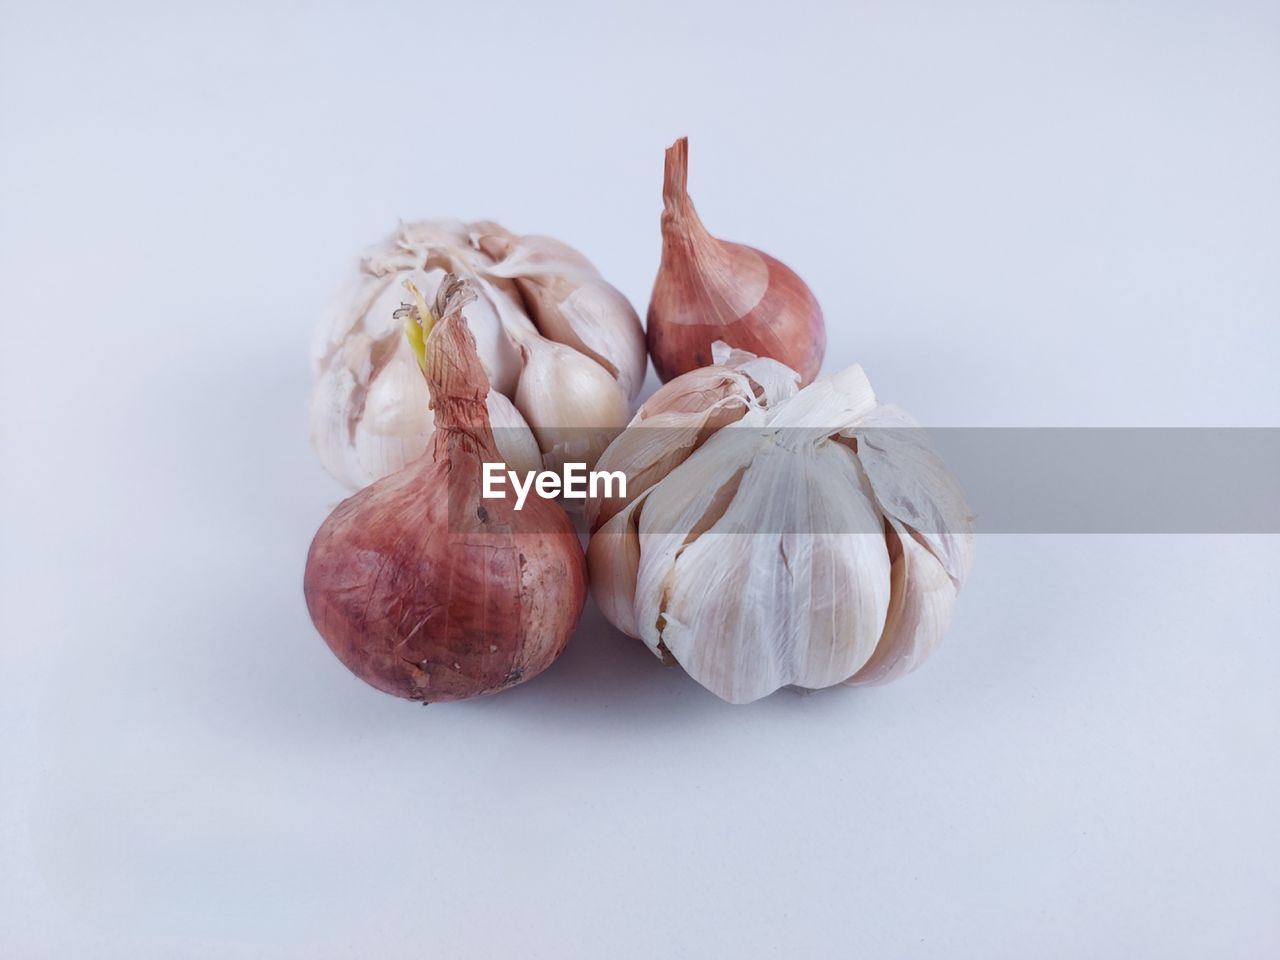 garlic, food and drink, food, shallot, plant, freshness, healthy eating, vegetable, produce, ingredient, garlic bulb, wellbeing, spice, studio shot, indoors, flower, still life, no people, onion, garlic clove, raw food, group of objects, close-up, red onion, organic